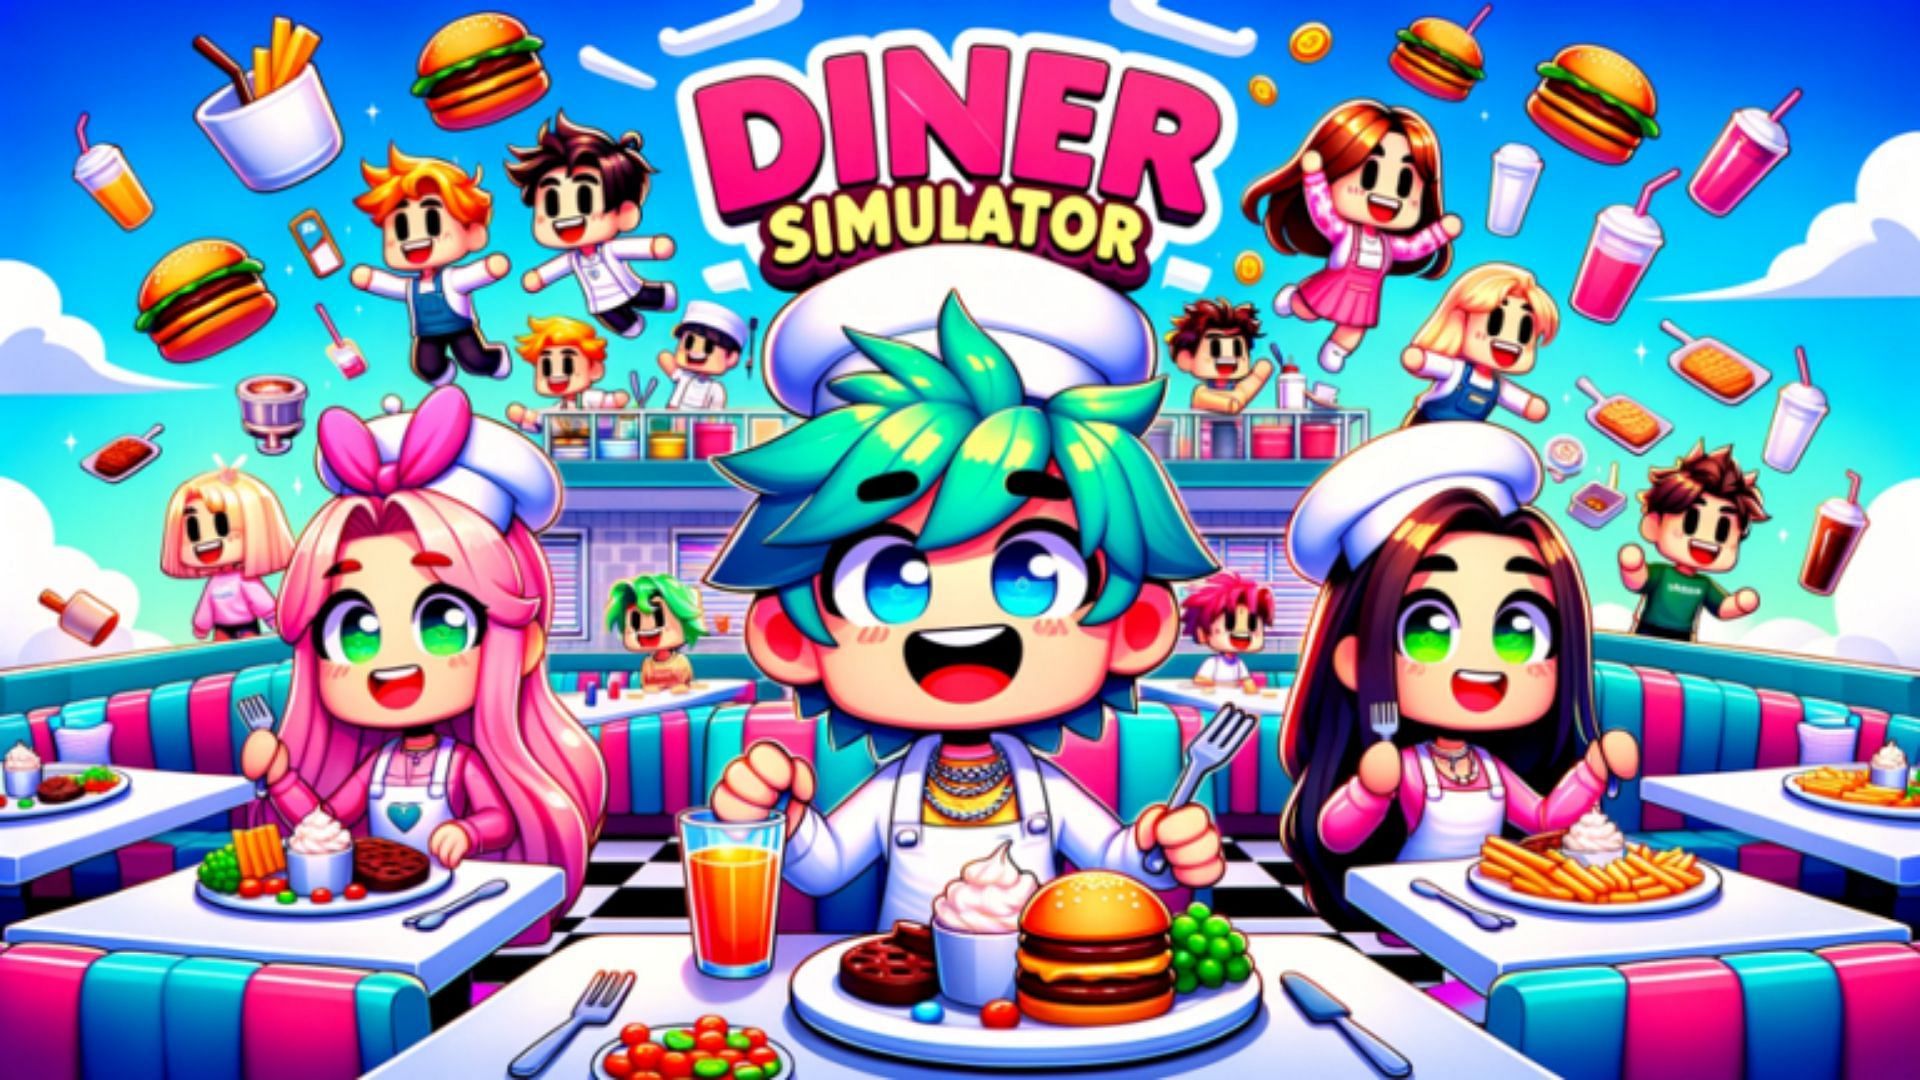 Codes for Diner Simulator and their importance (Image via Roblox)